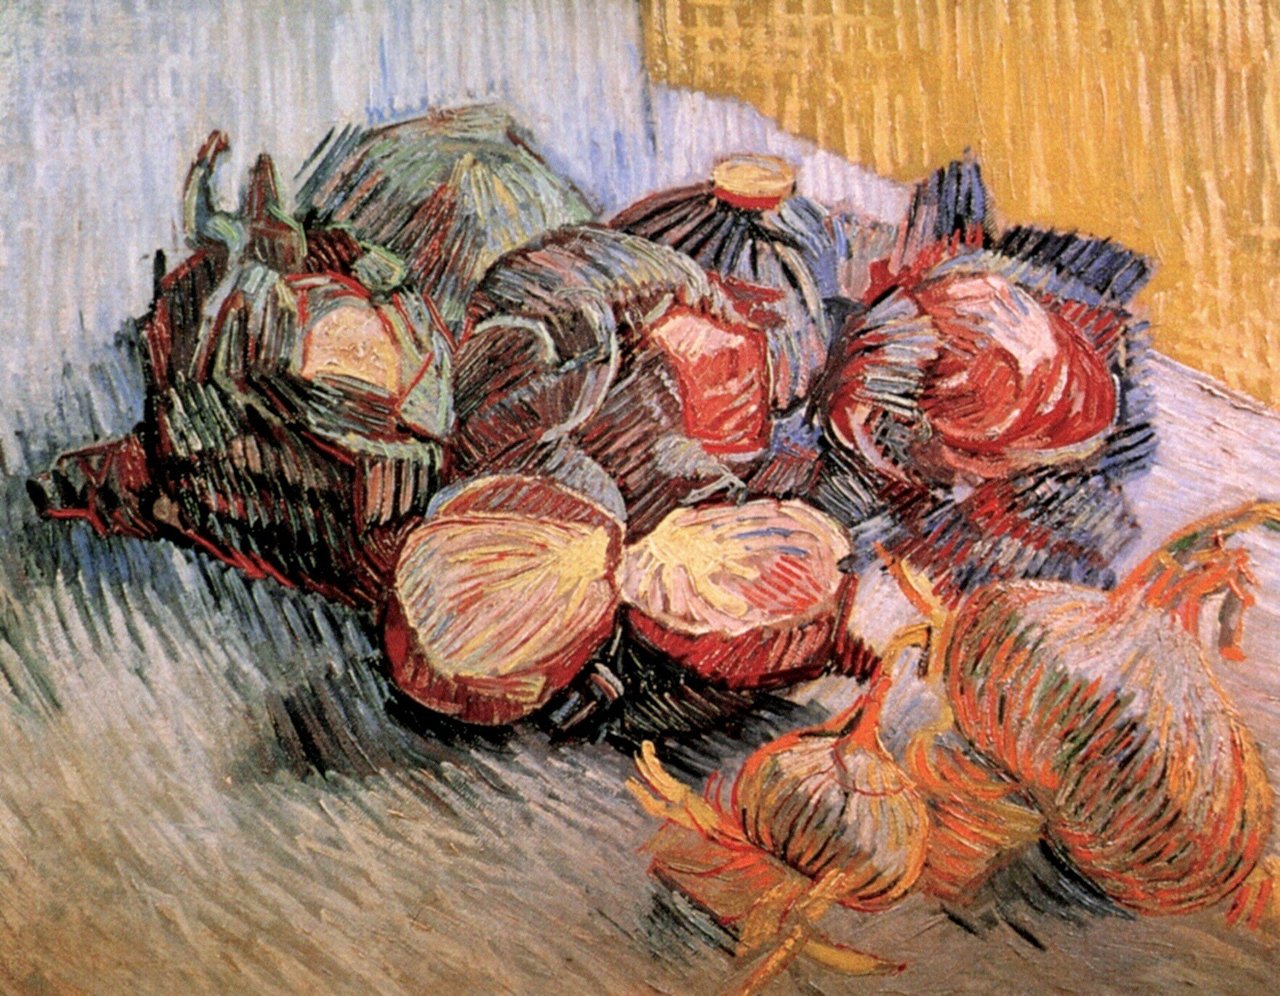 VAN GOGH, "STILL LIFE WITH RED CABBAGES AND ONIONS 1887 #art #arttwit #twitart #vangogh #artist #iloveart #artlover https://t.co/lY3Neh4lNP